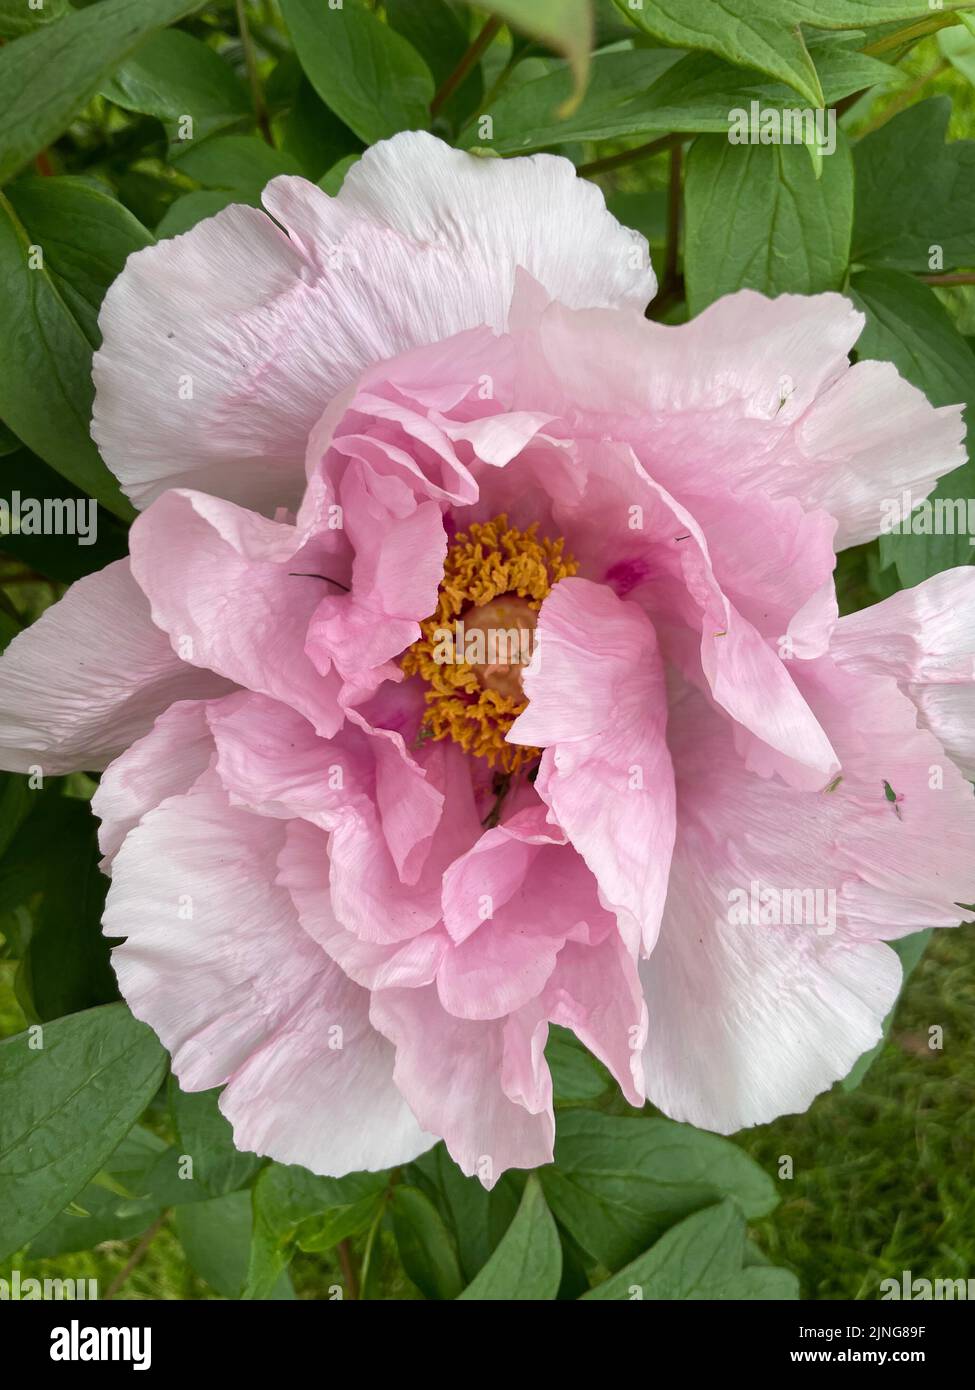 Peony Tree blossom (Paeonia 'Globe of Light') close-up for flower and petal with green leaves in soft focus in the background. Stock Photo